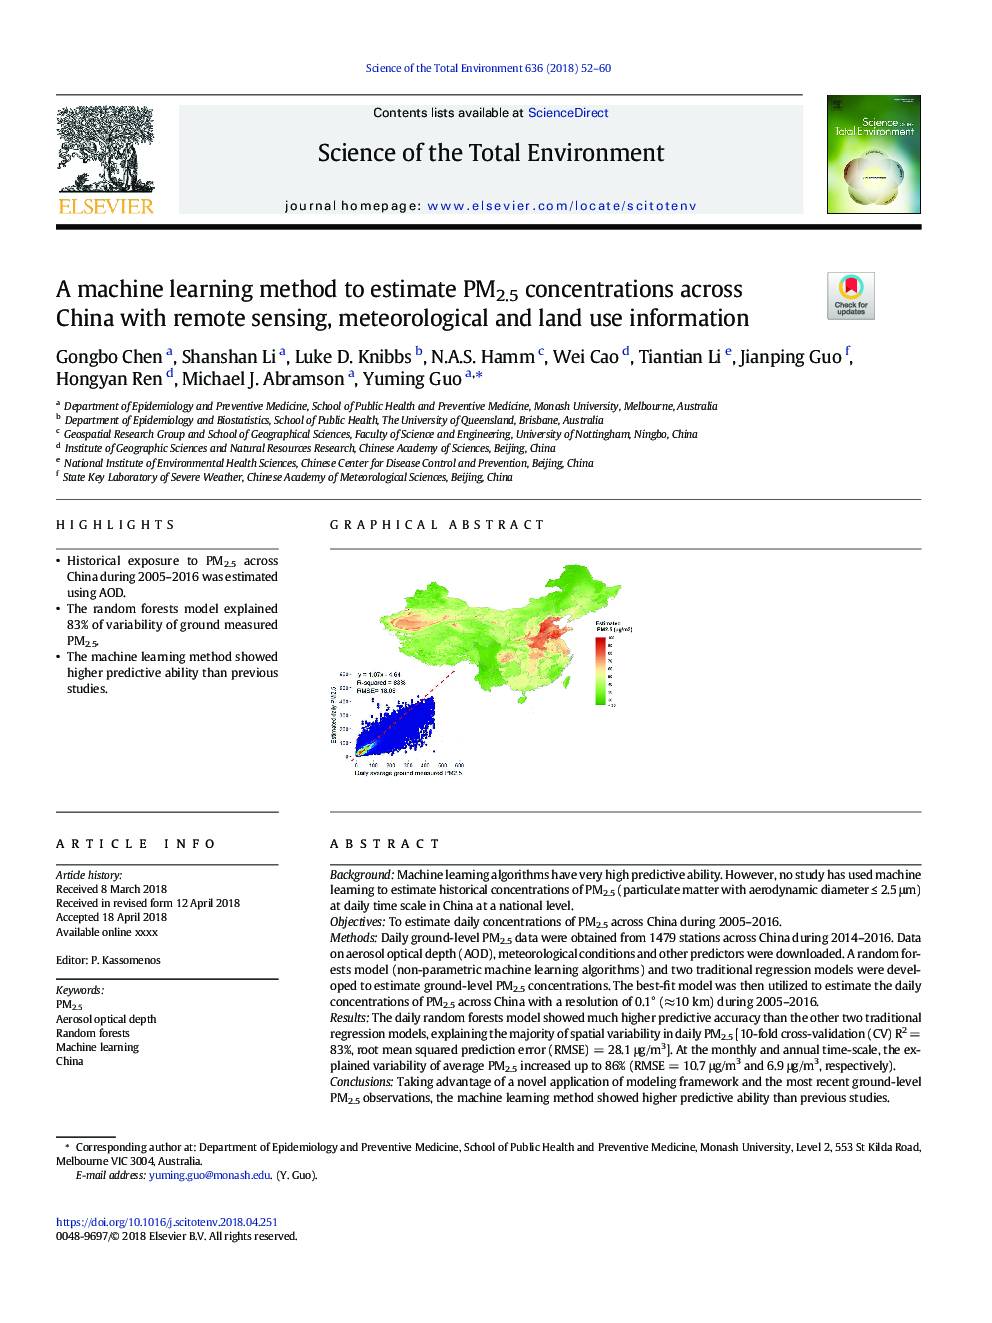 A machine learning method to estimate PM2.5 concentrations across China with remote sensing, meteorological and land use information